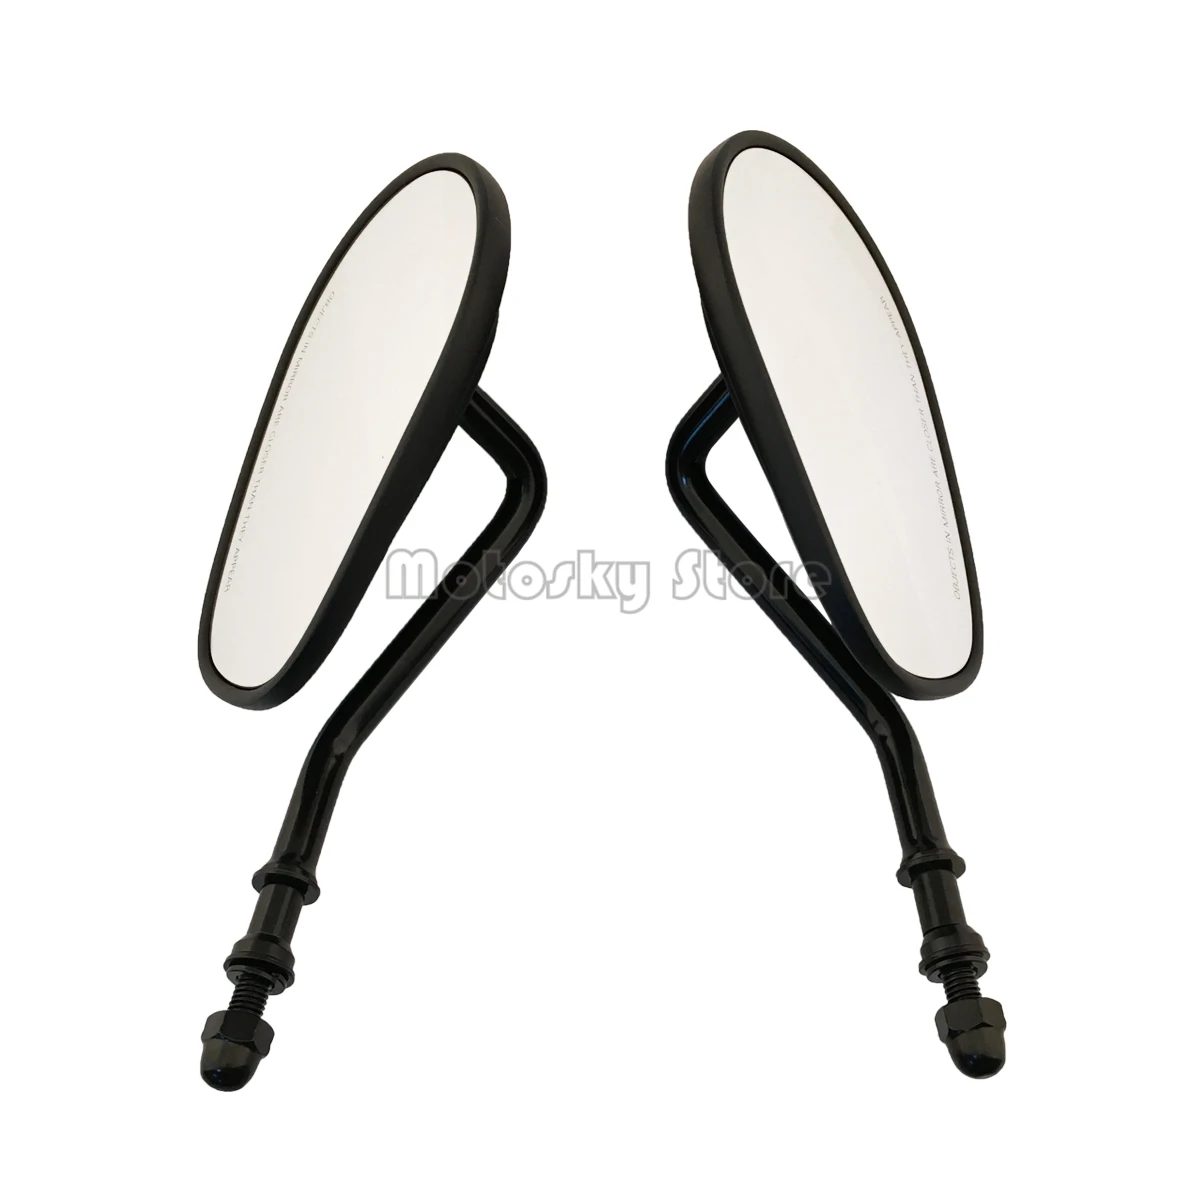 Black Goldfire Black Sportster Mirrors for Road King Street Electra Glide Dyna Softail Road Glide Motorcycle Rearview 1982-2019 